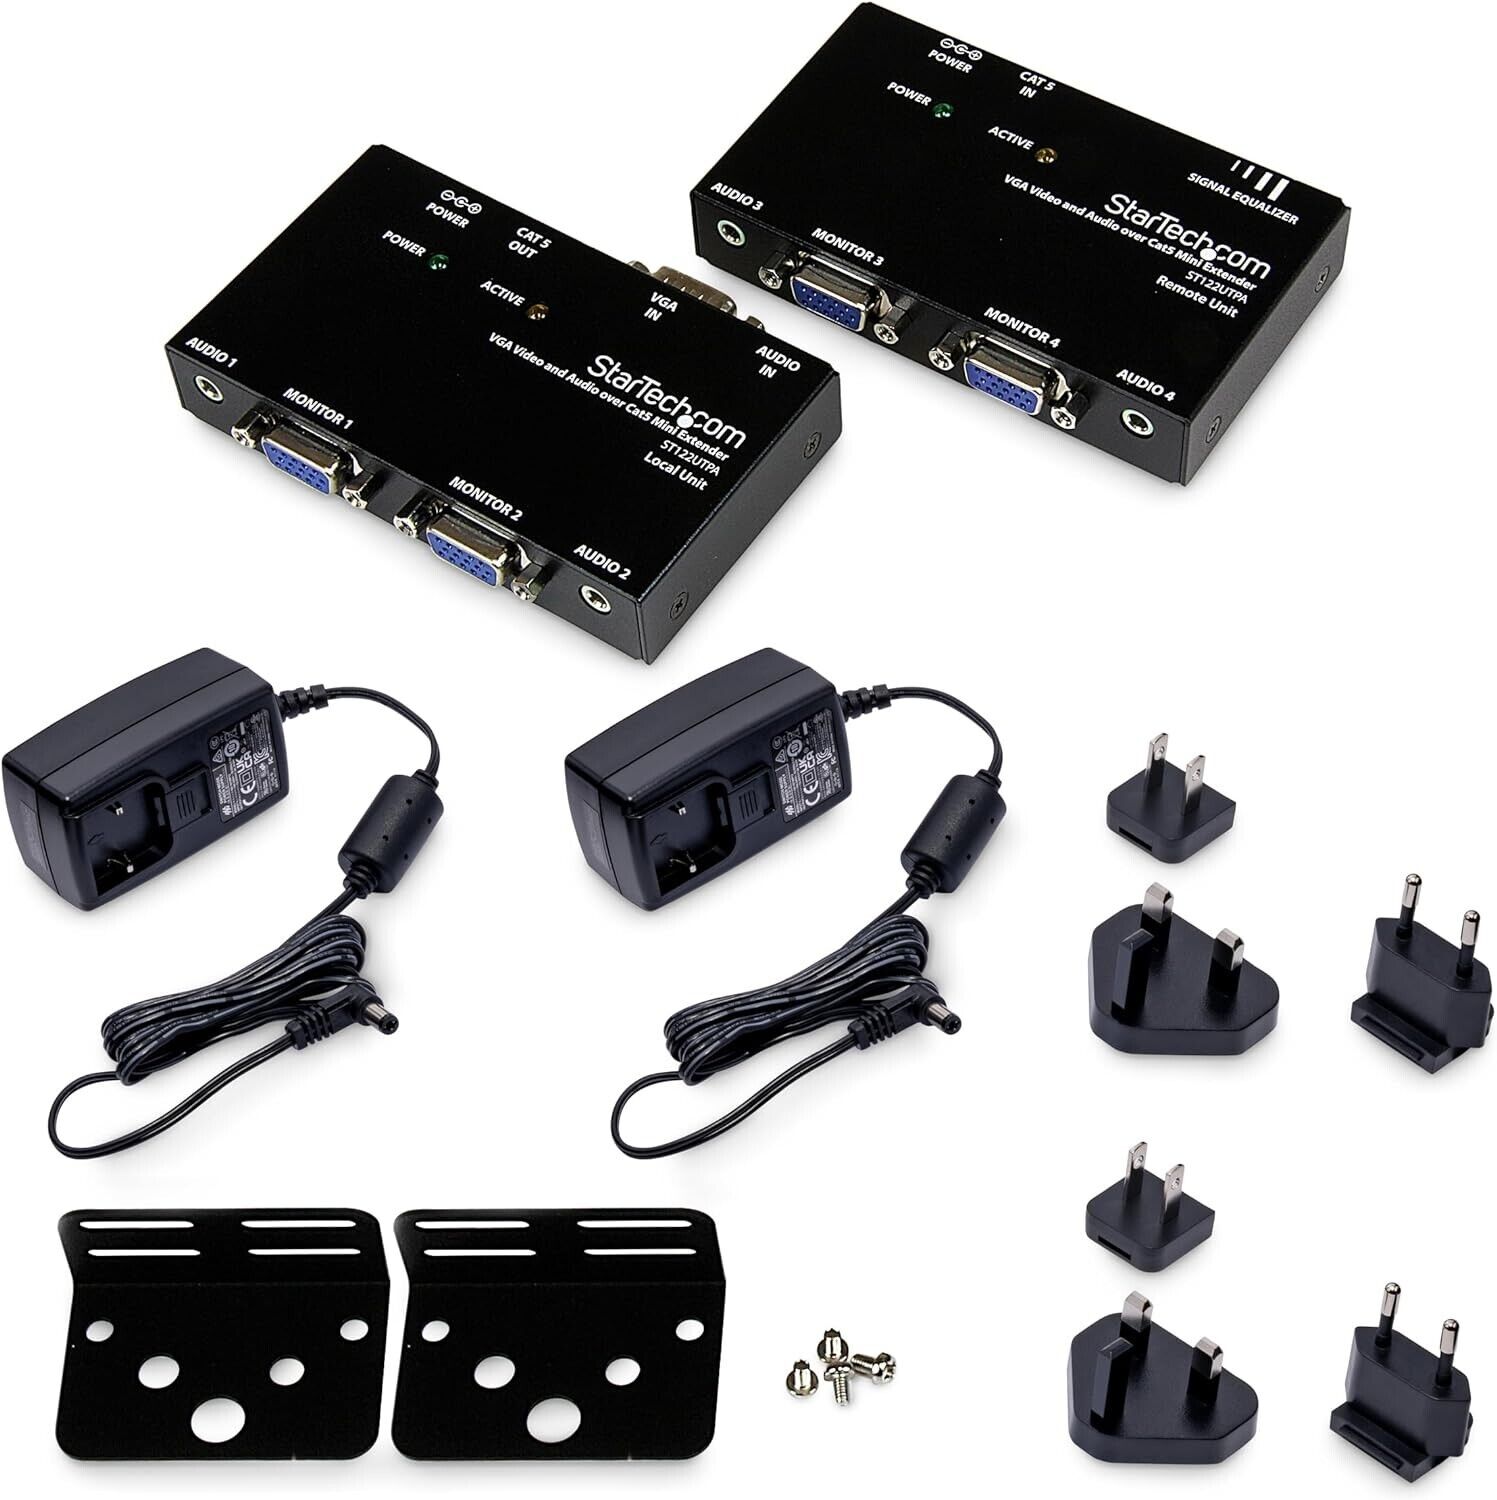 VGA Video Extender over Cat 5 with Audio Up to 500ft VGA over Extender ST122UTPA